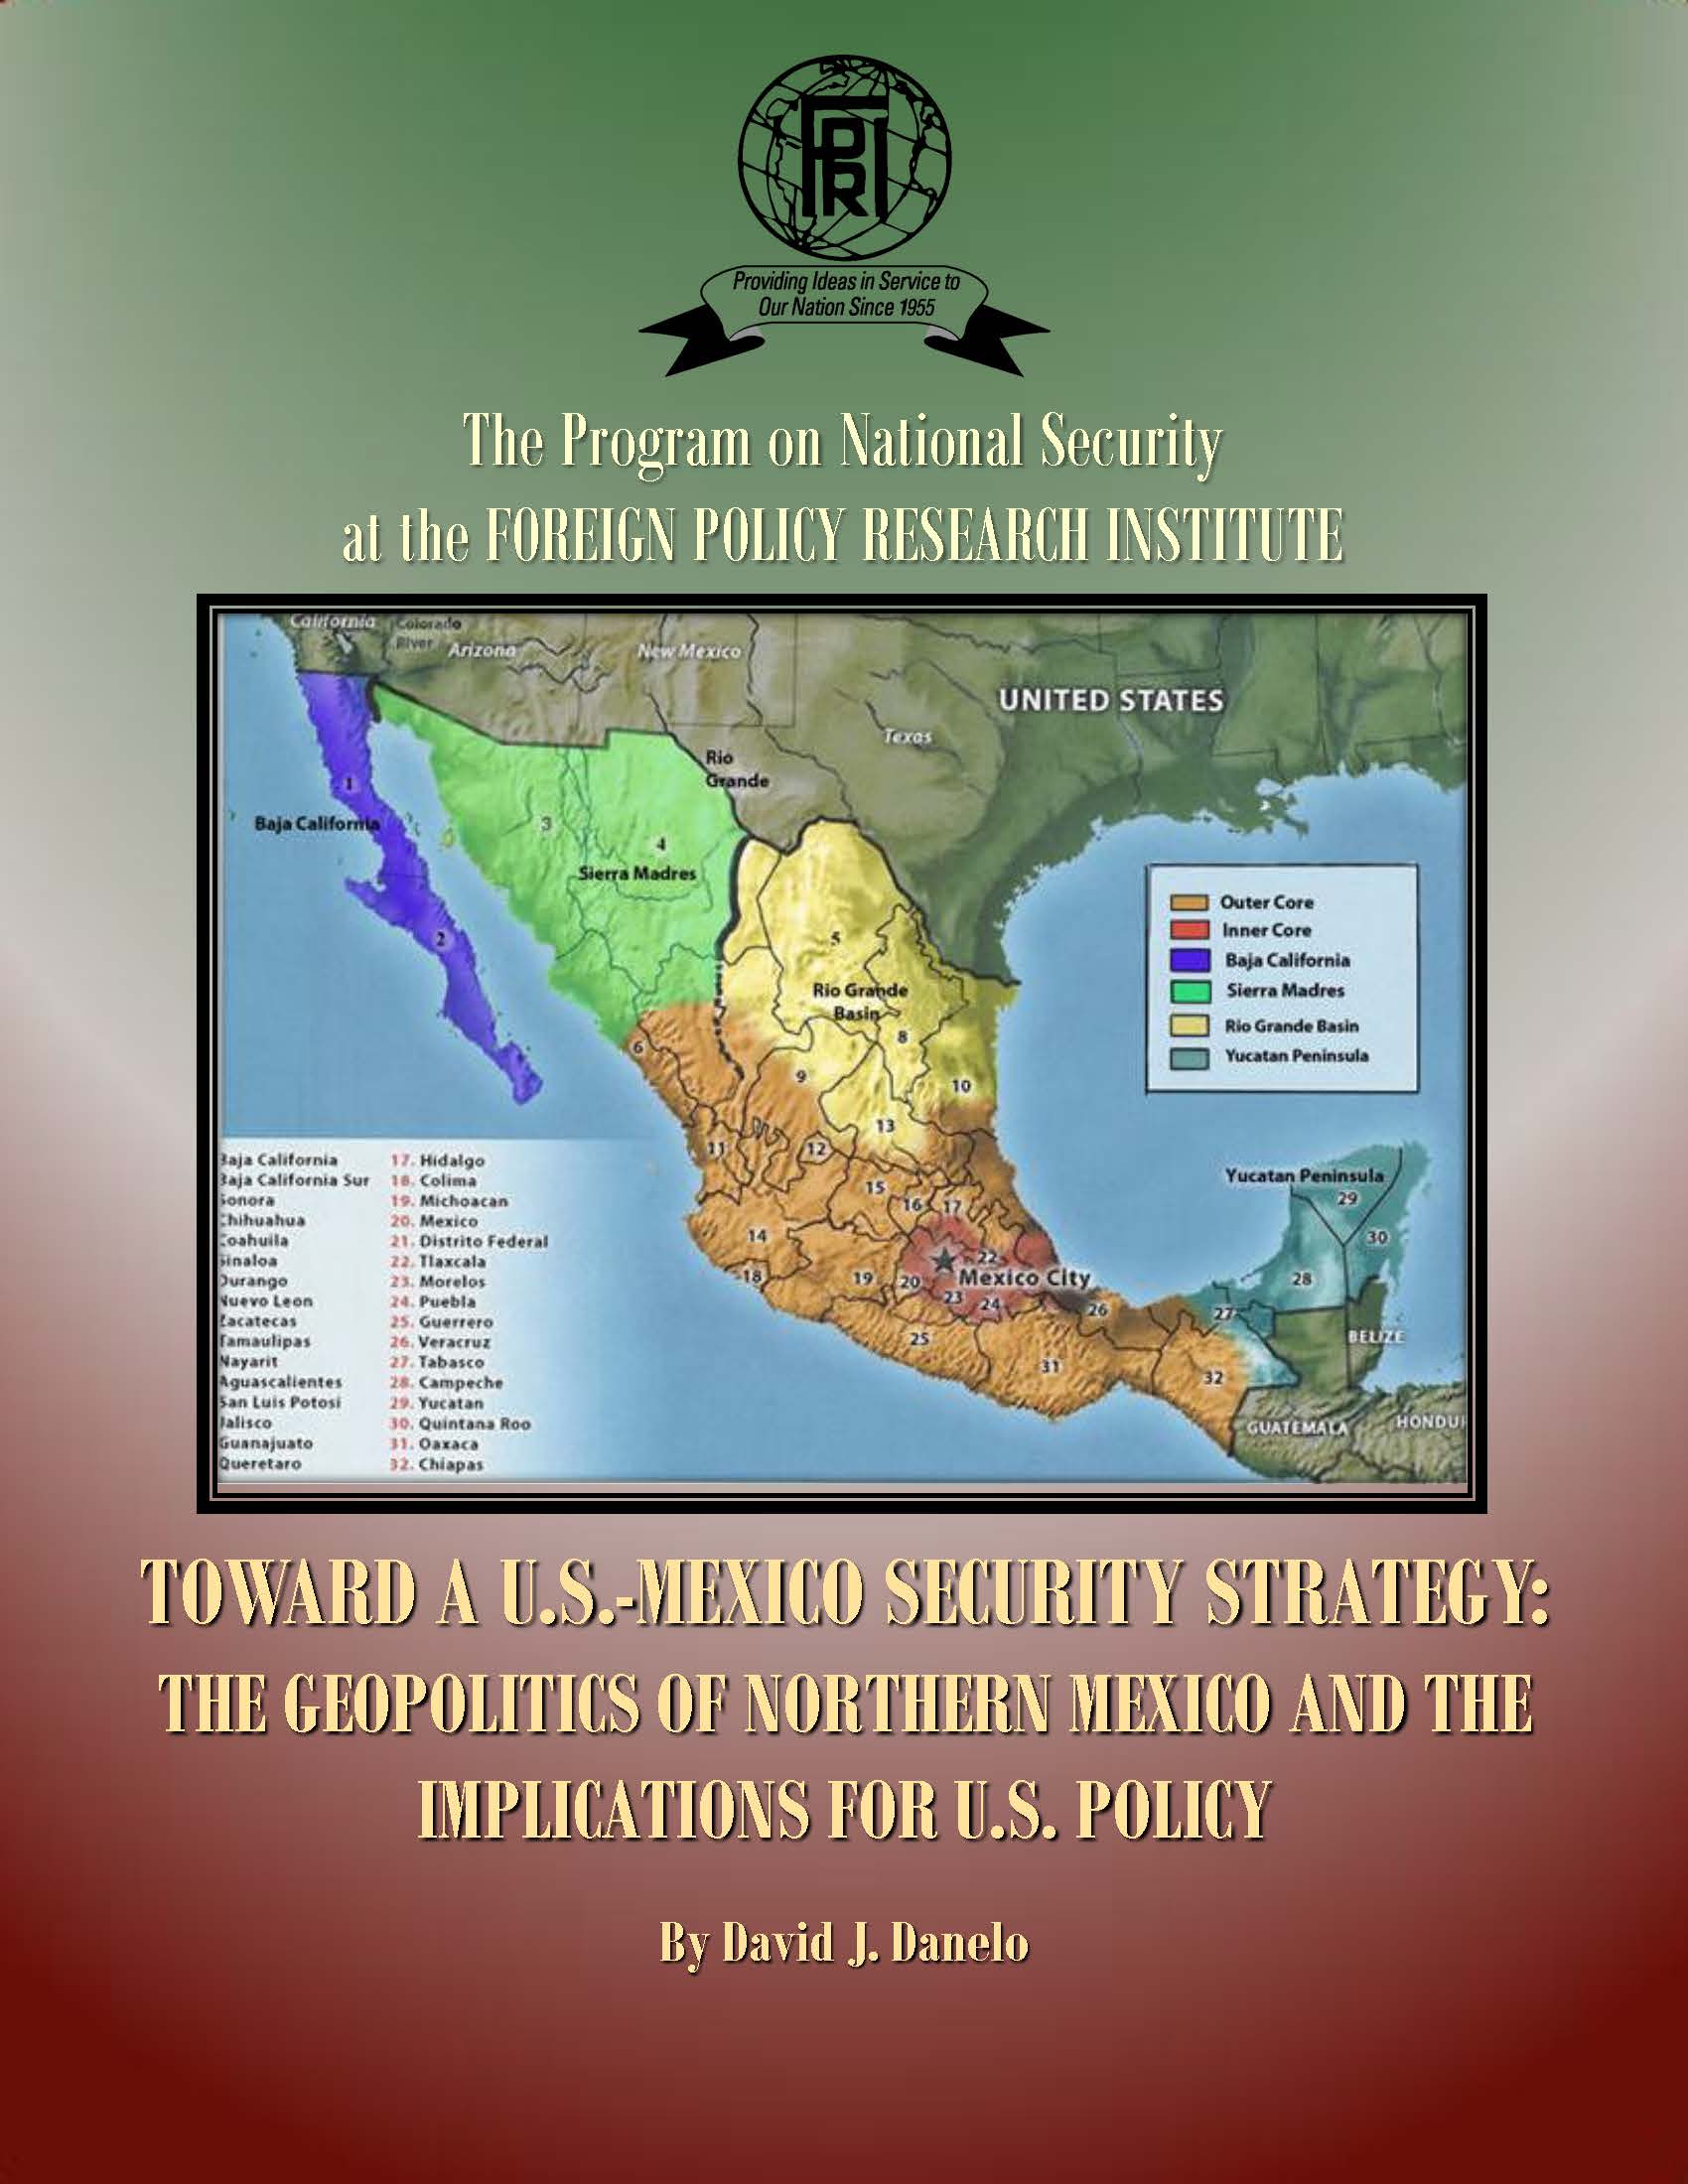 Toward a U.S.-Mexico Security Strategy: The Geopolitics of Northern Mexico and the Implications for U.S. Policy